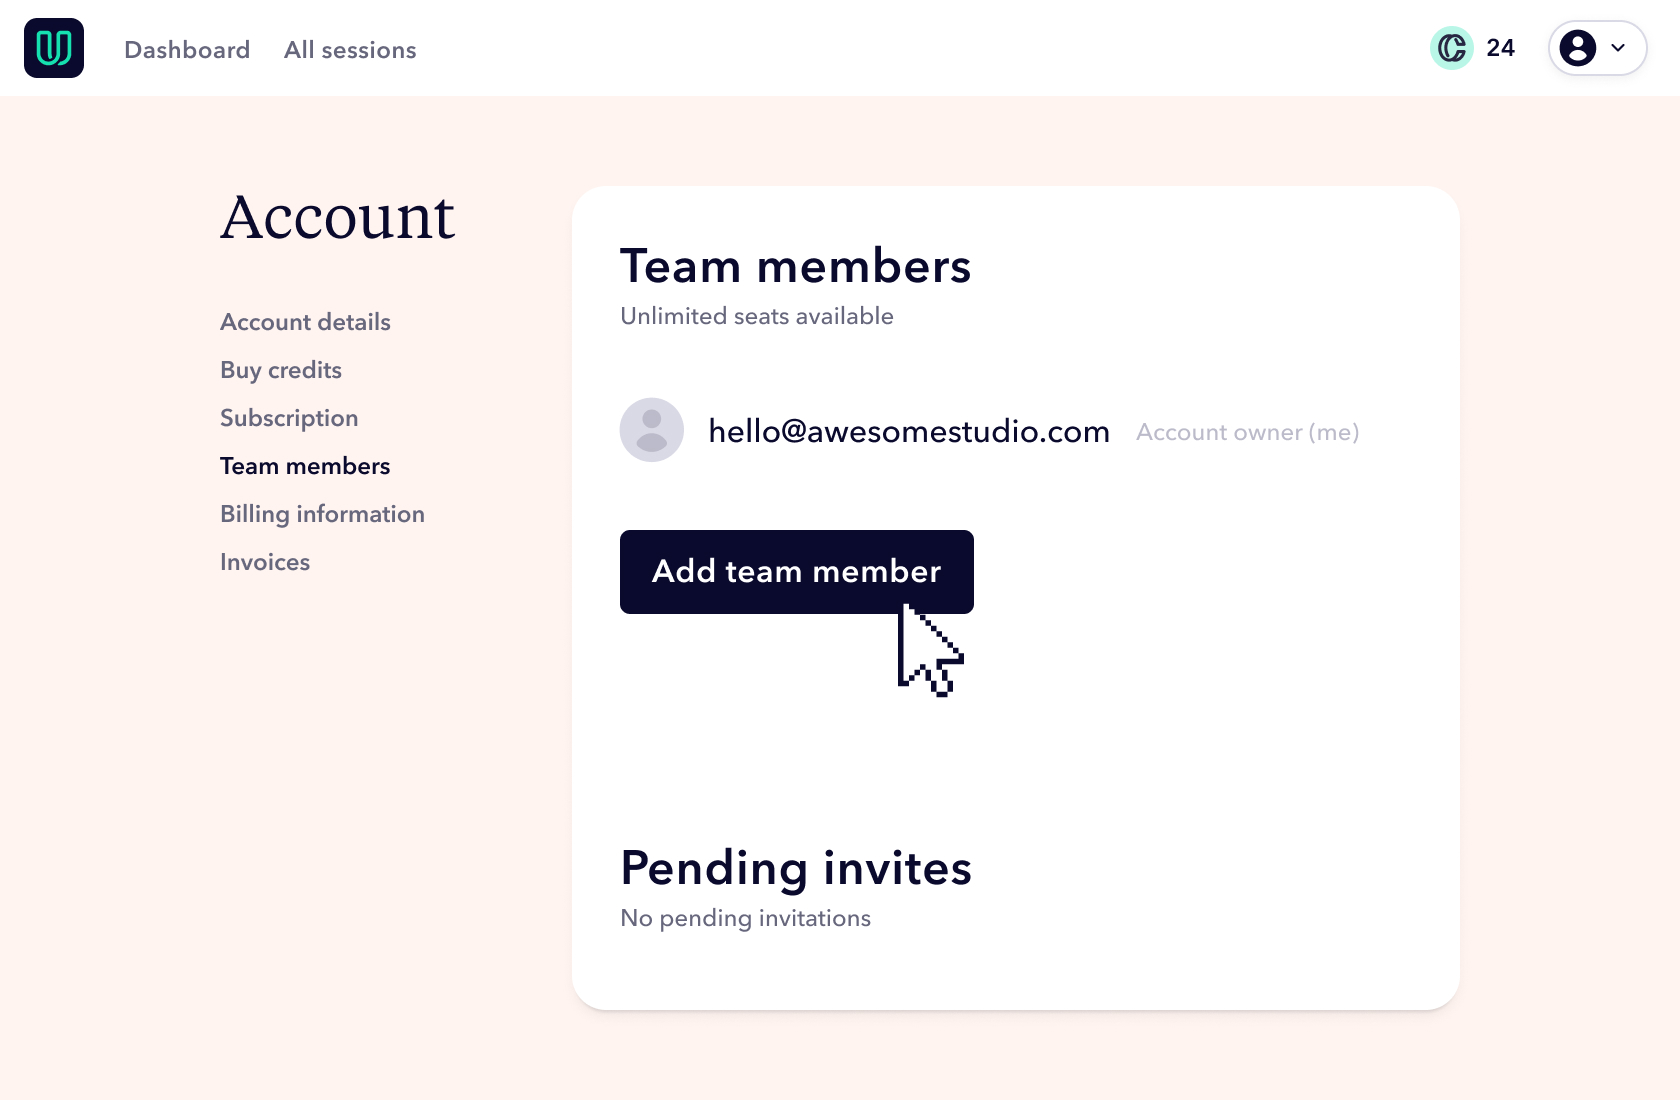 Add team member, second step: Mouse pointer clicking on add team member